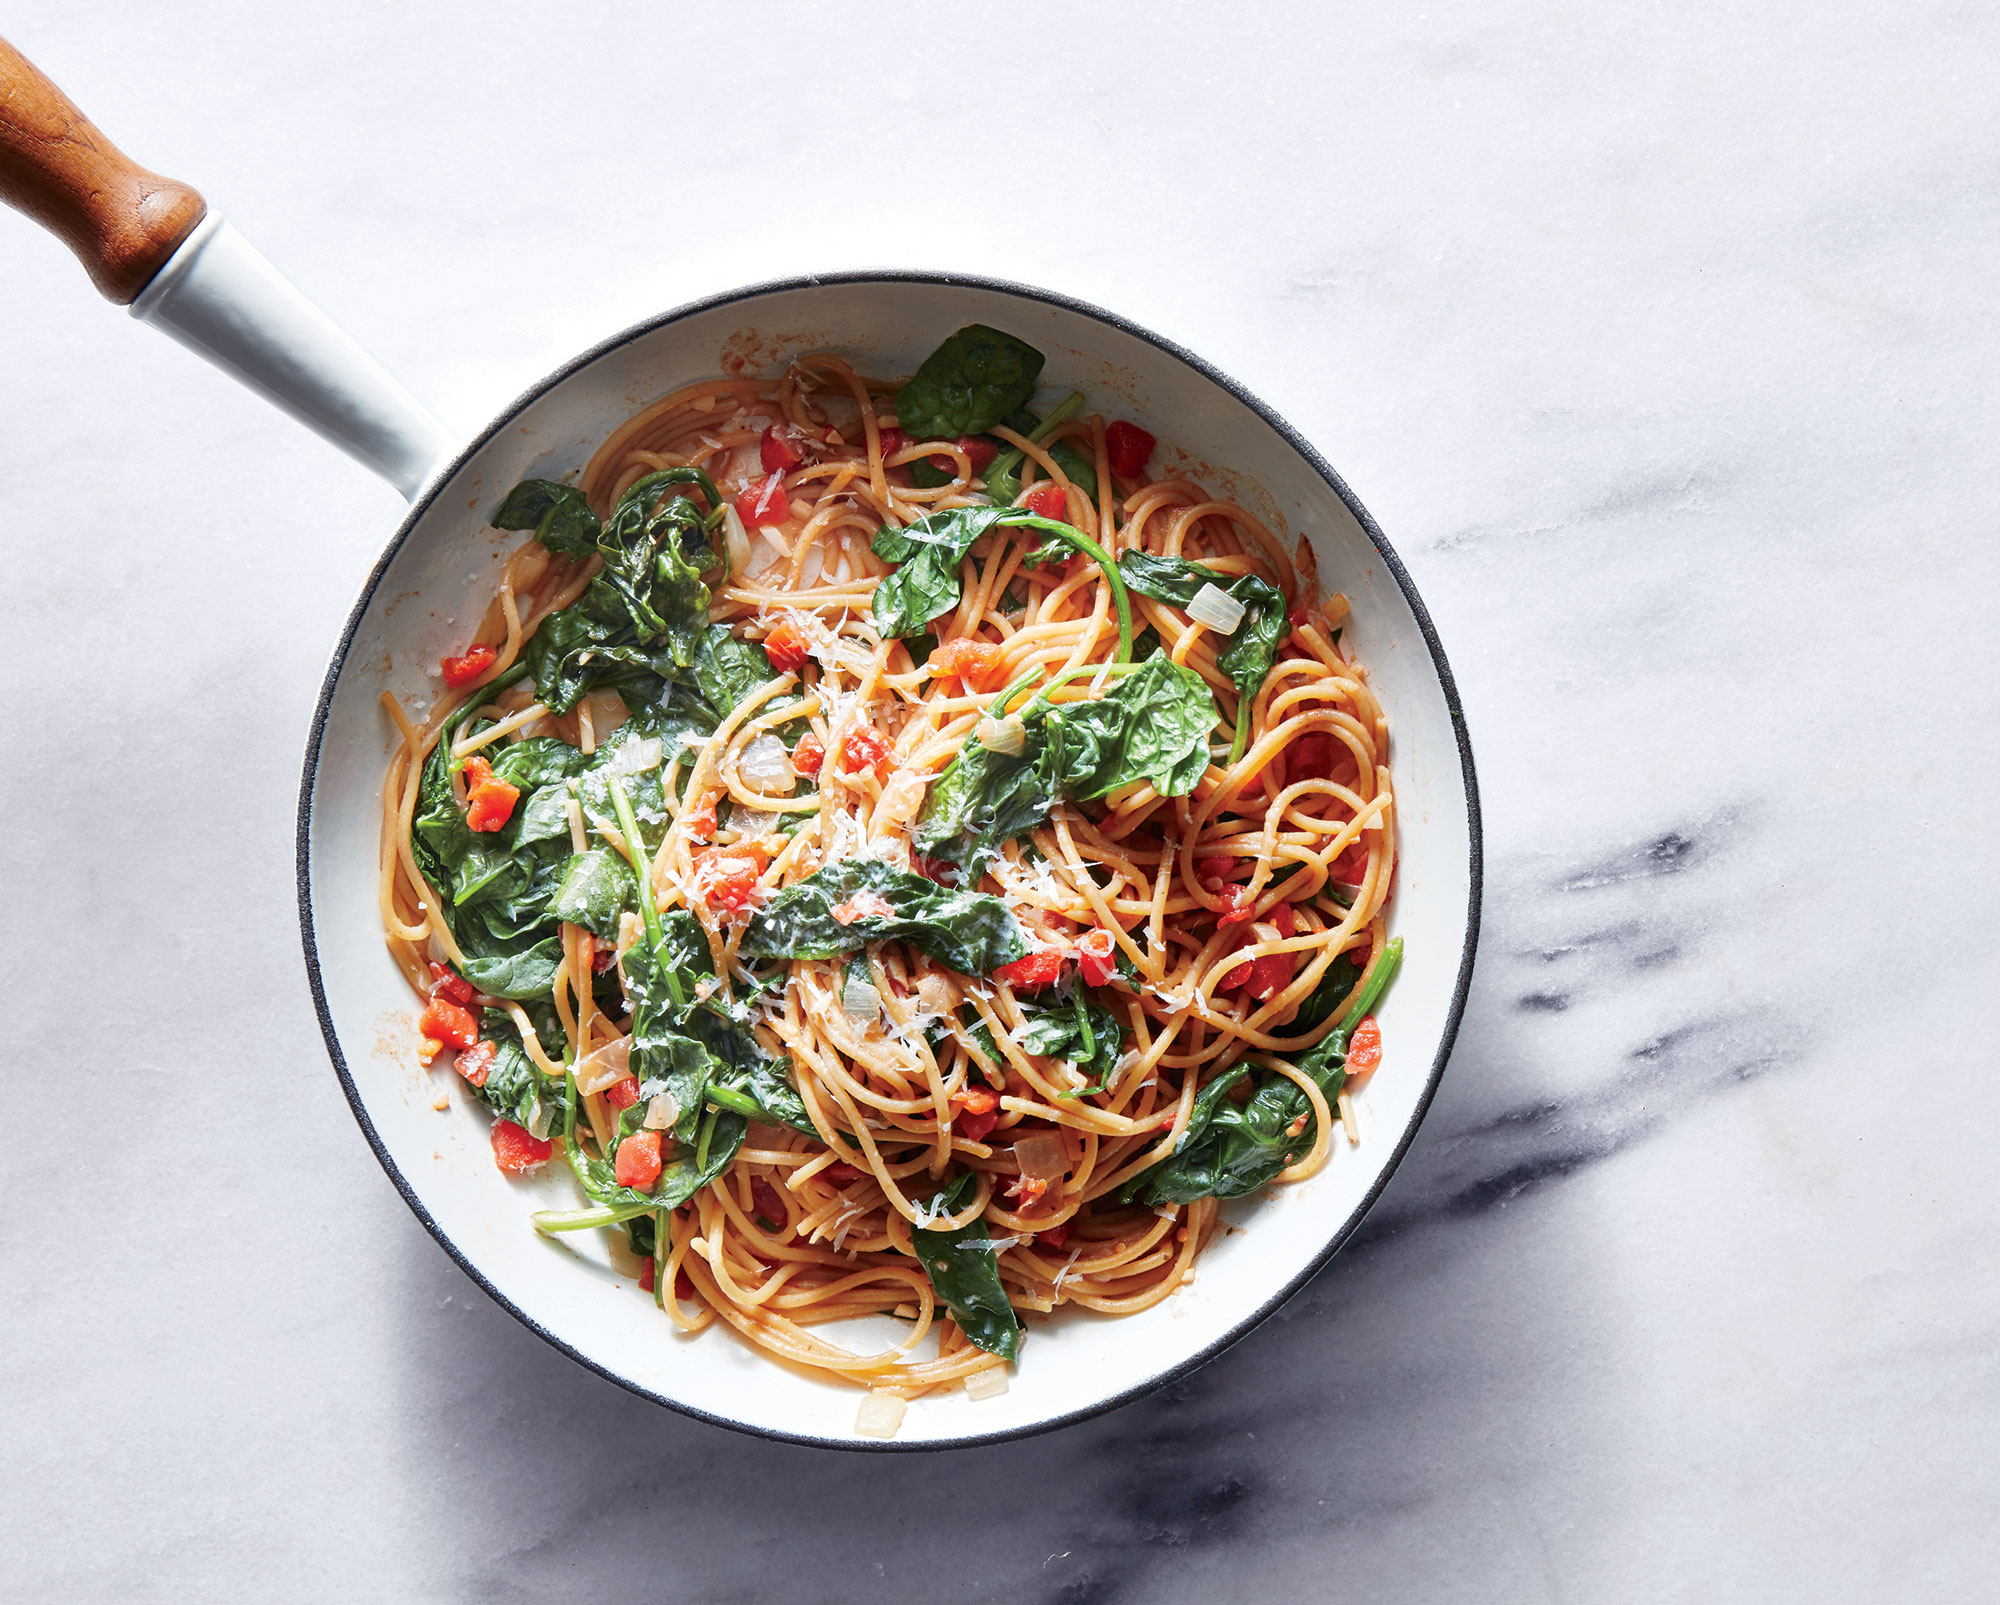 https://static.onecms.io/wp-content/uploads/sites/19/2015/01/27/one-pot-pasta-spinach-tomatoes-1711p35.jpg